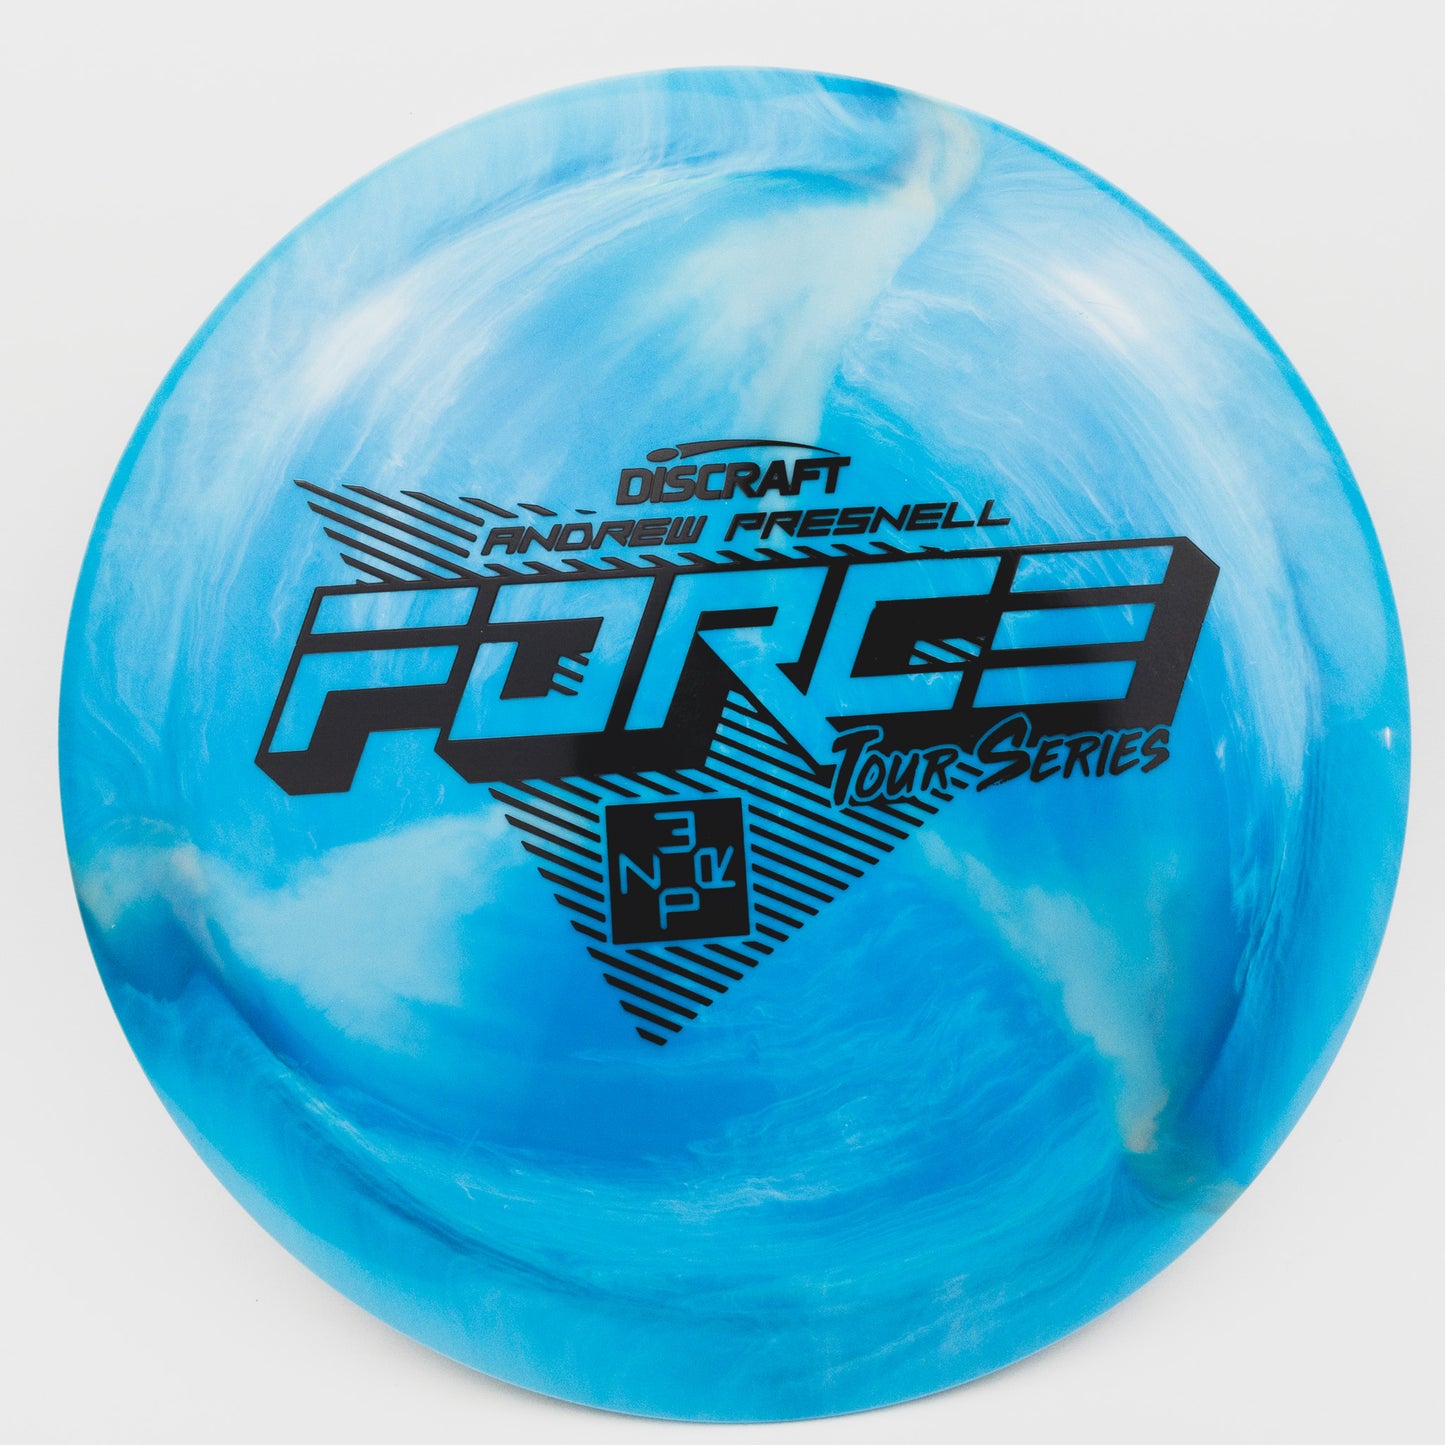 Discraft ESP Swirl Force Andrew Presnell Tour 2022